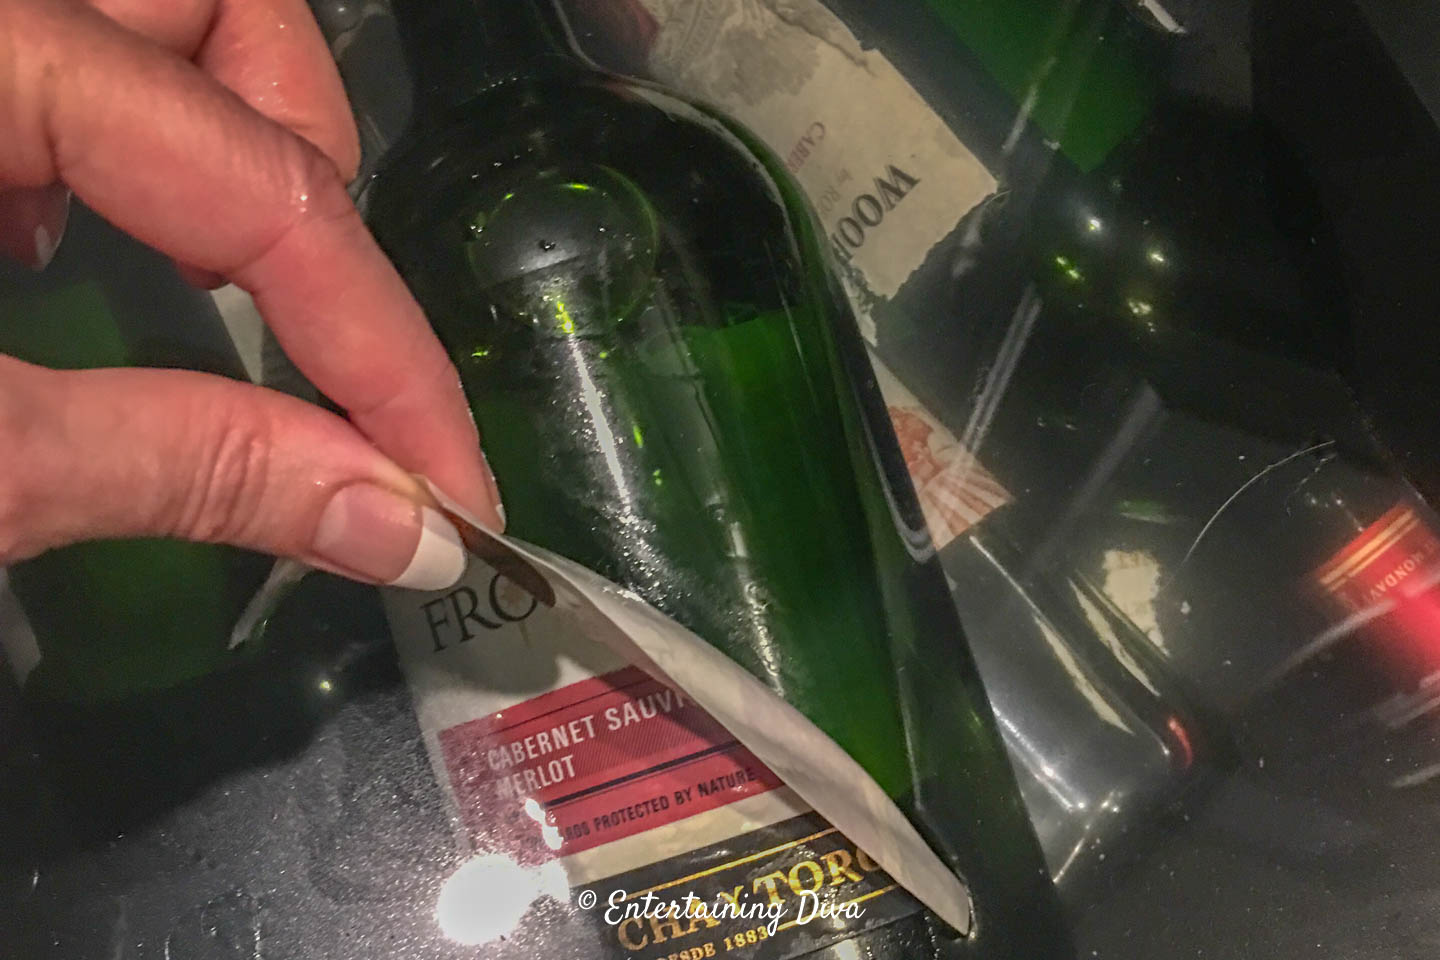 Peeling the labels off the bottles